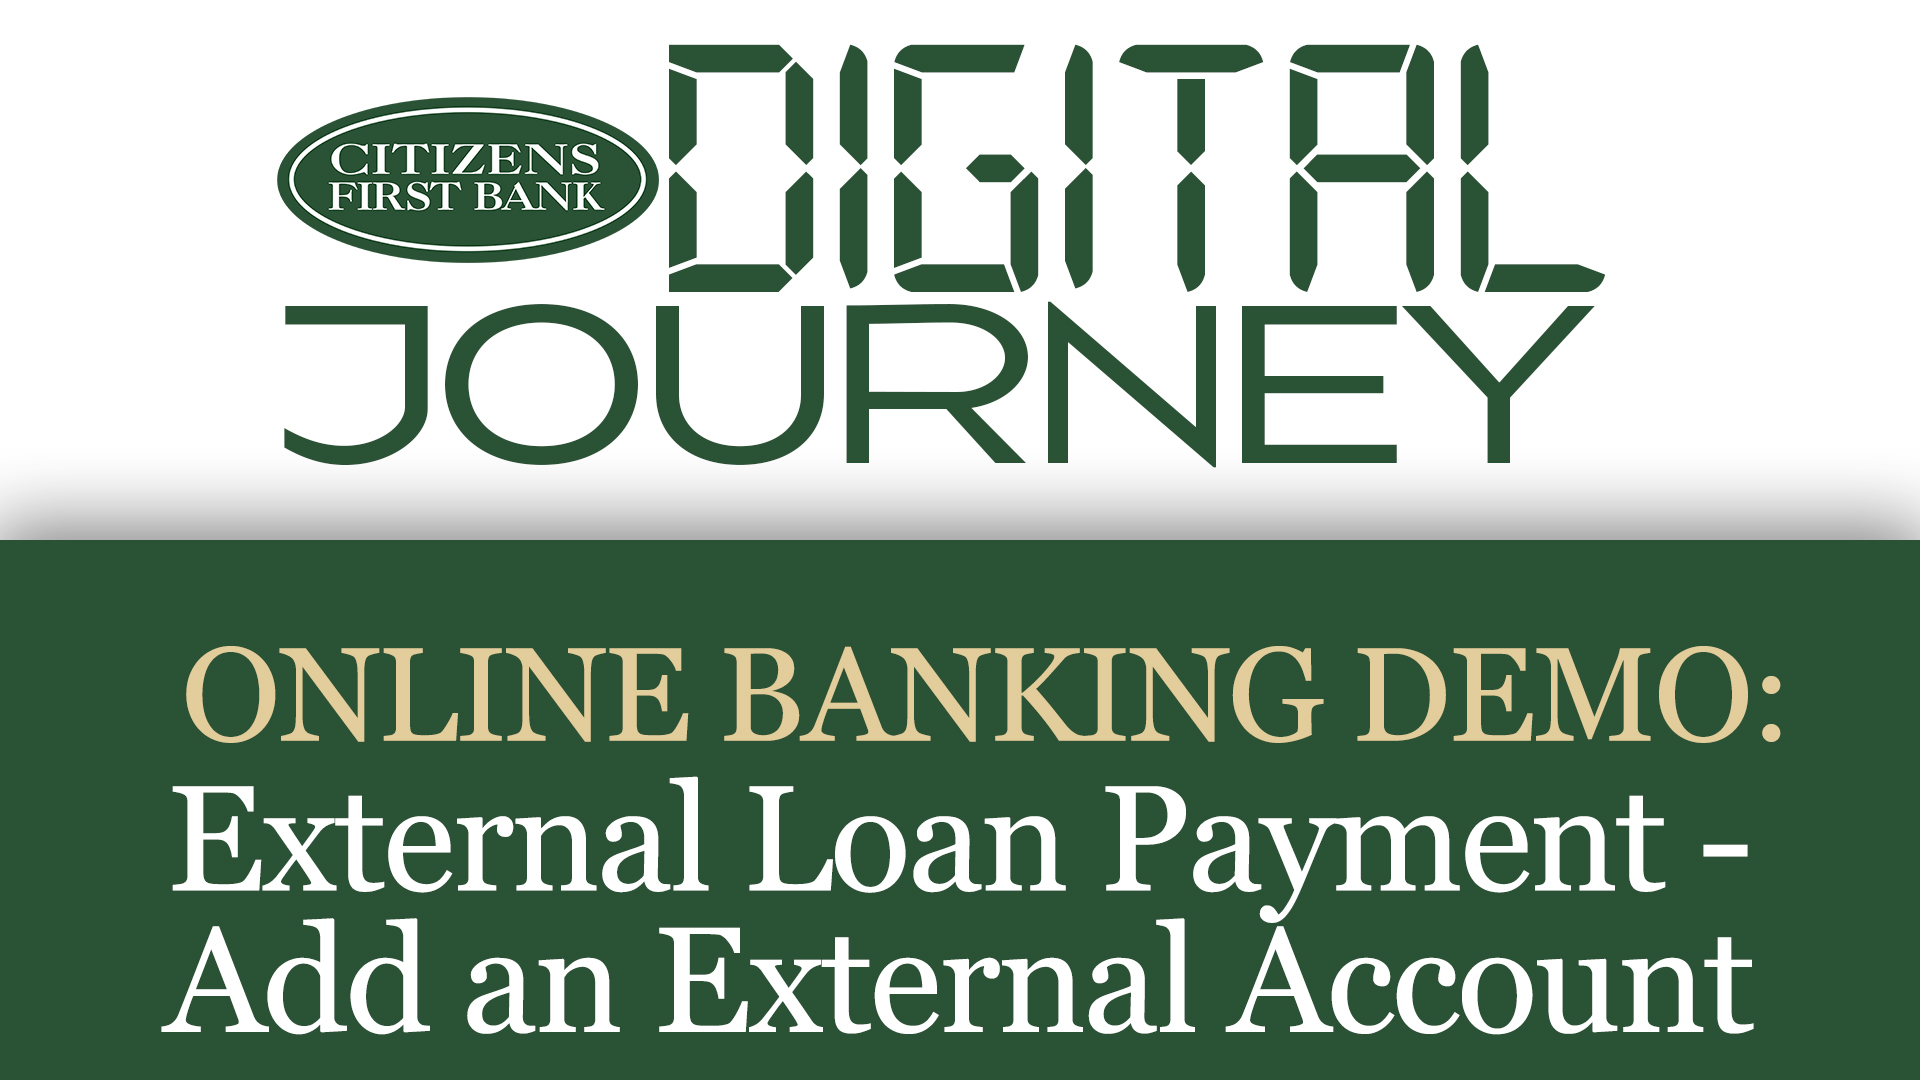 Digital Journey logo with our online banking demo: External Loan Payment - Add an External Account